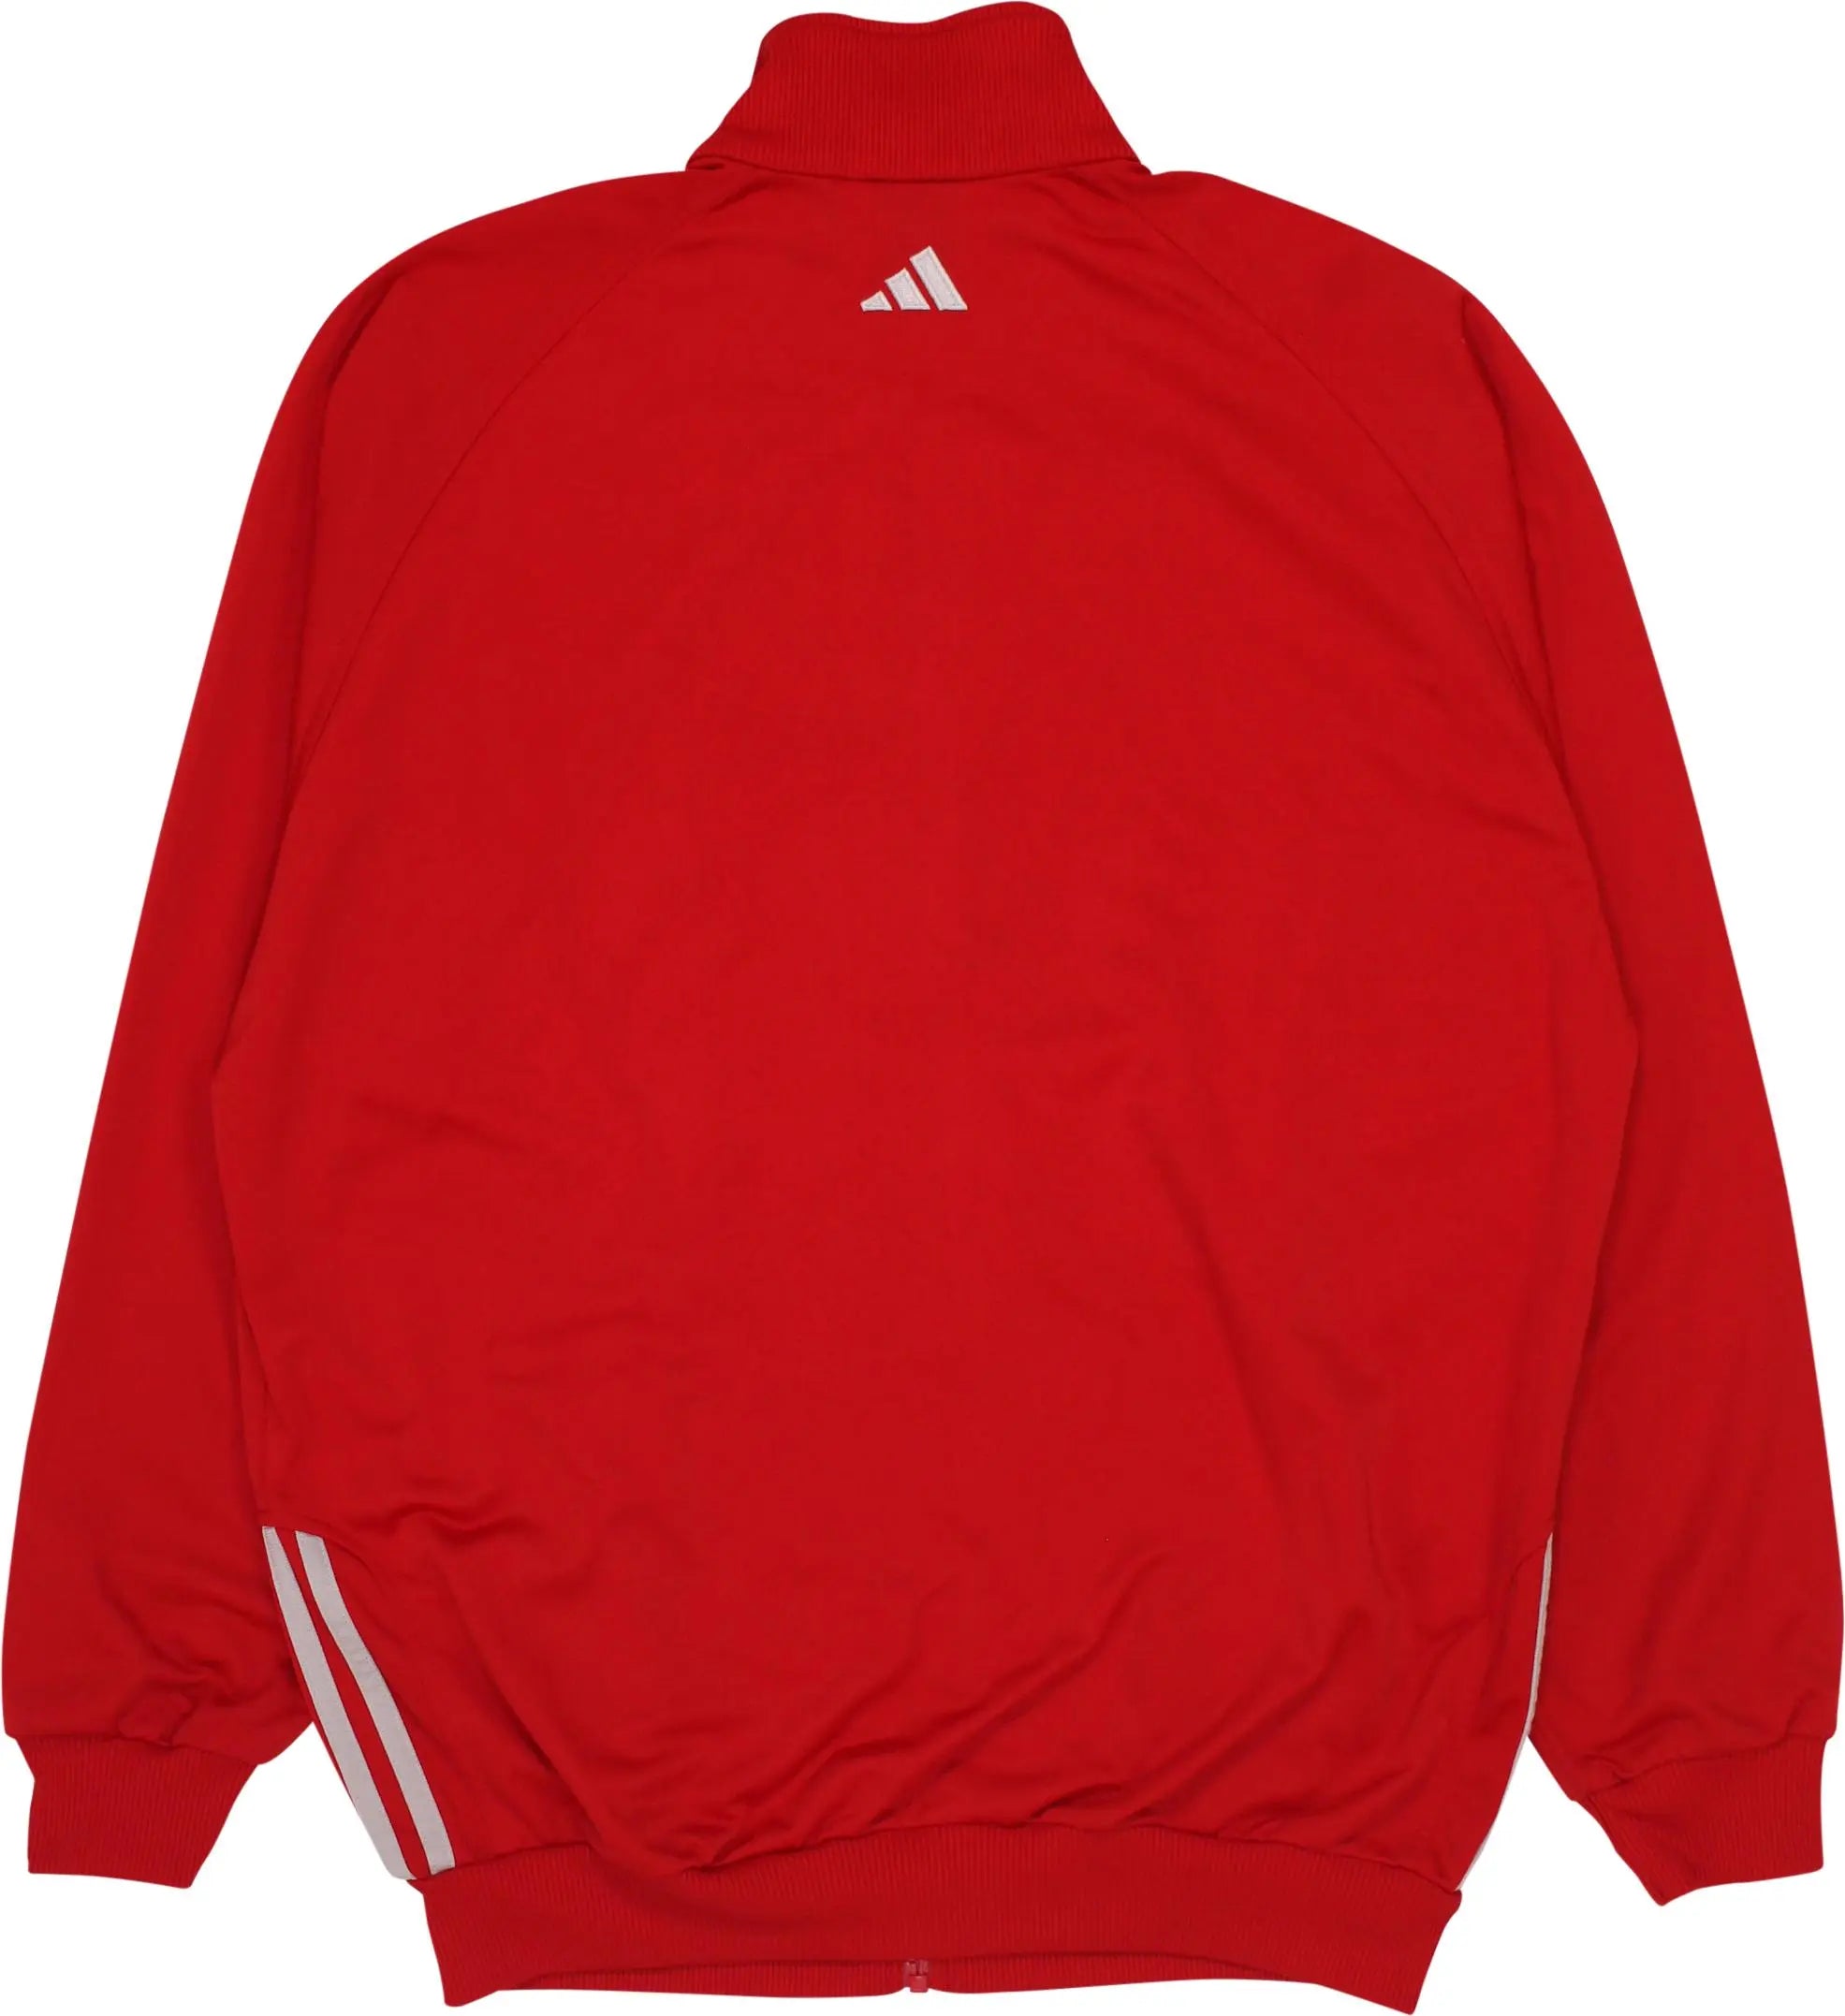 Adidas - 00s Adidas Track Jacket- ThriftTale.com - Vintage and second handclothing